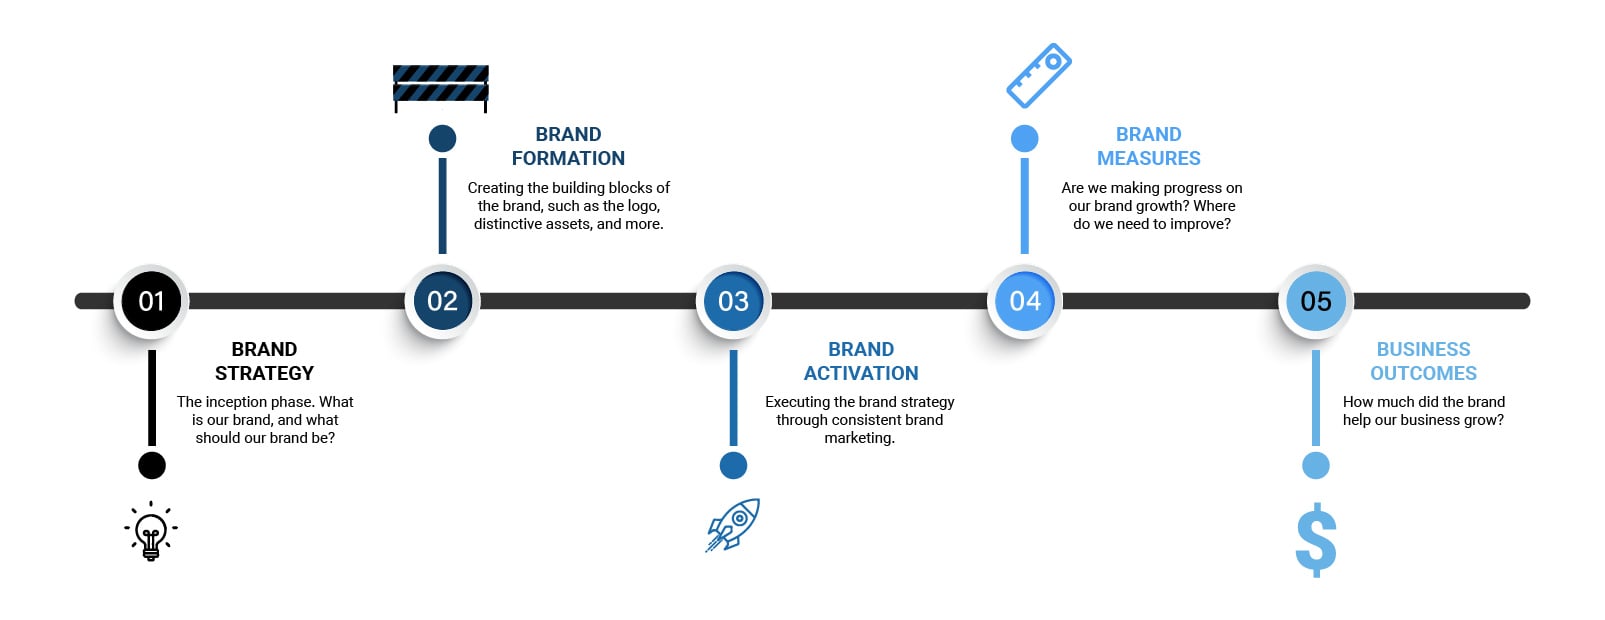 The Brand Lifecycle